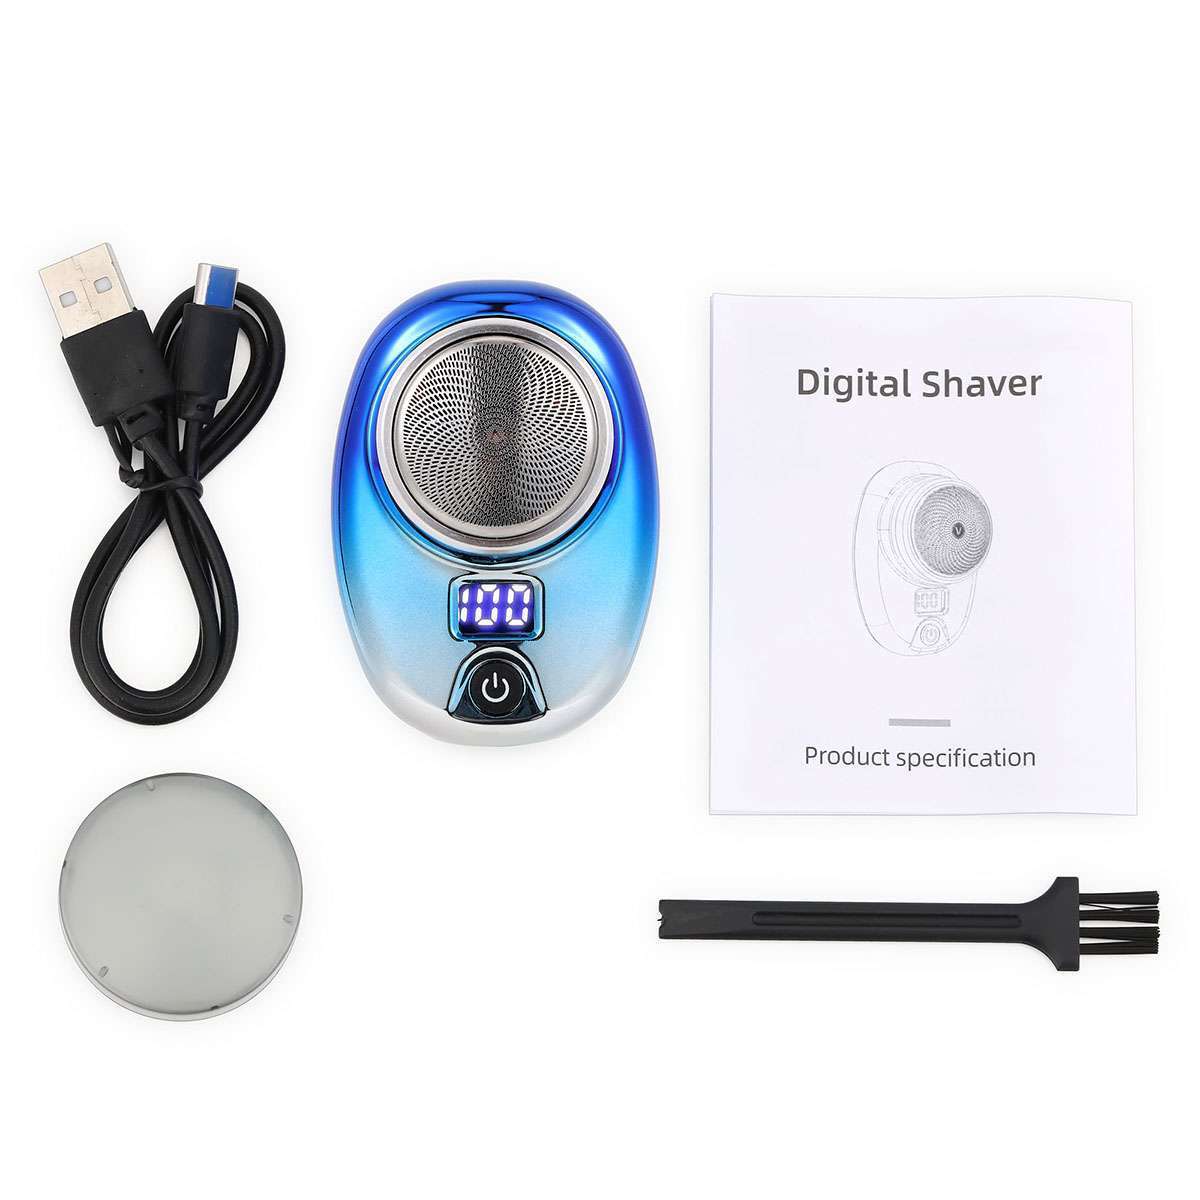 Mini-Shave Portable Electric Razor for Men USB Rechargeable Shaver Home Travel